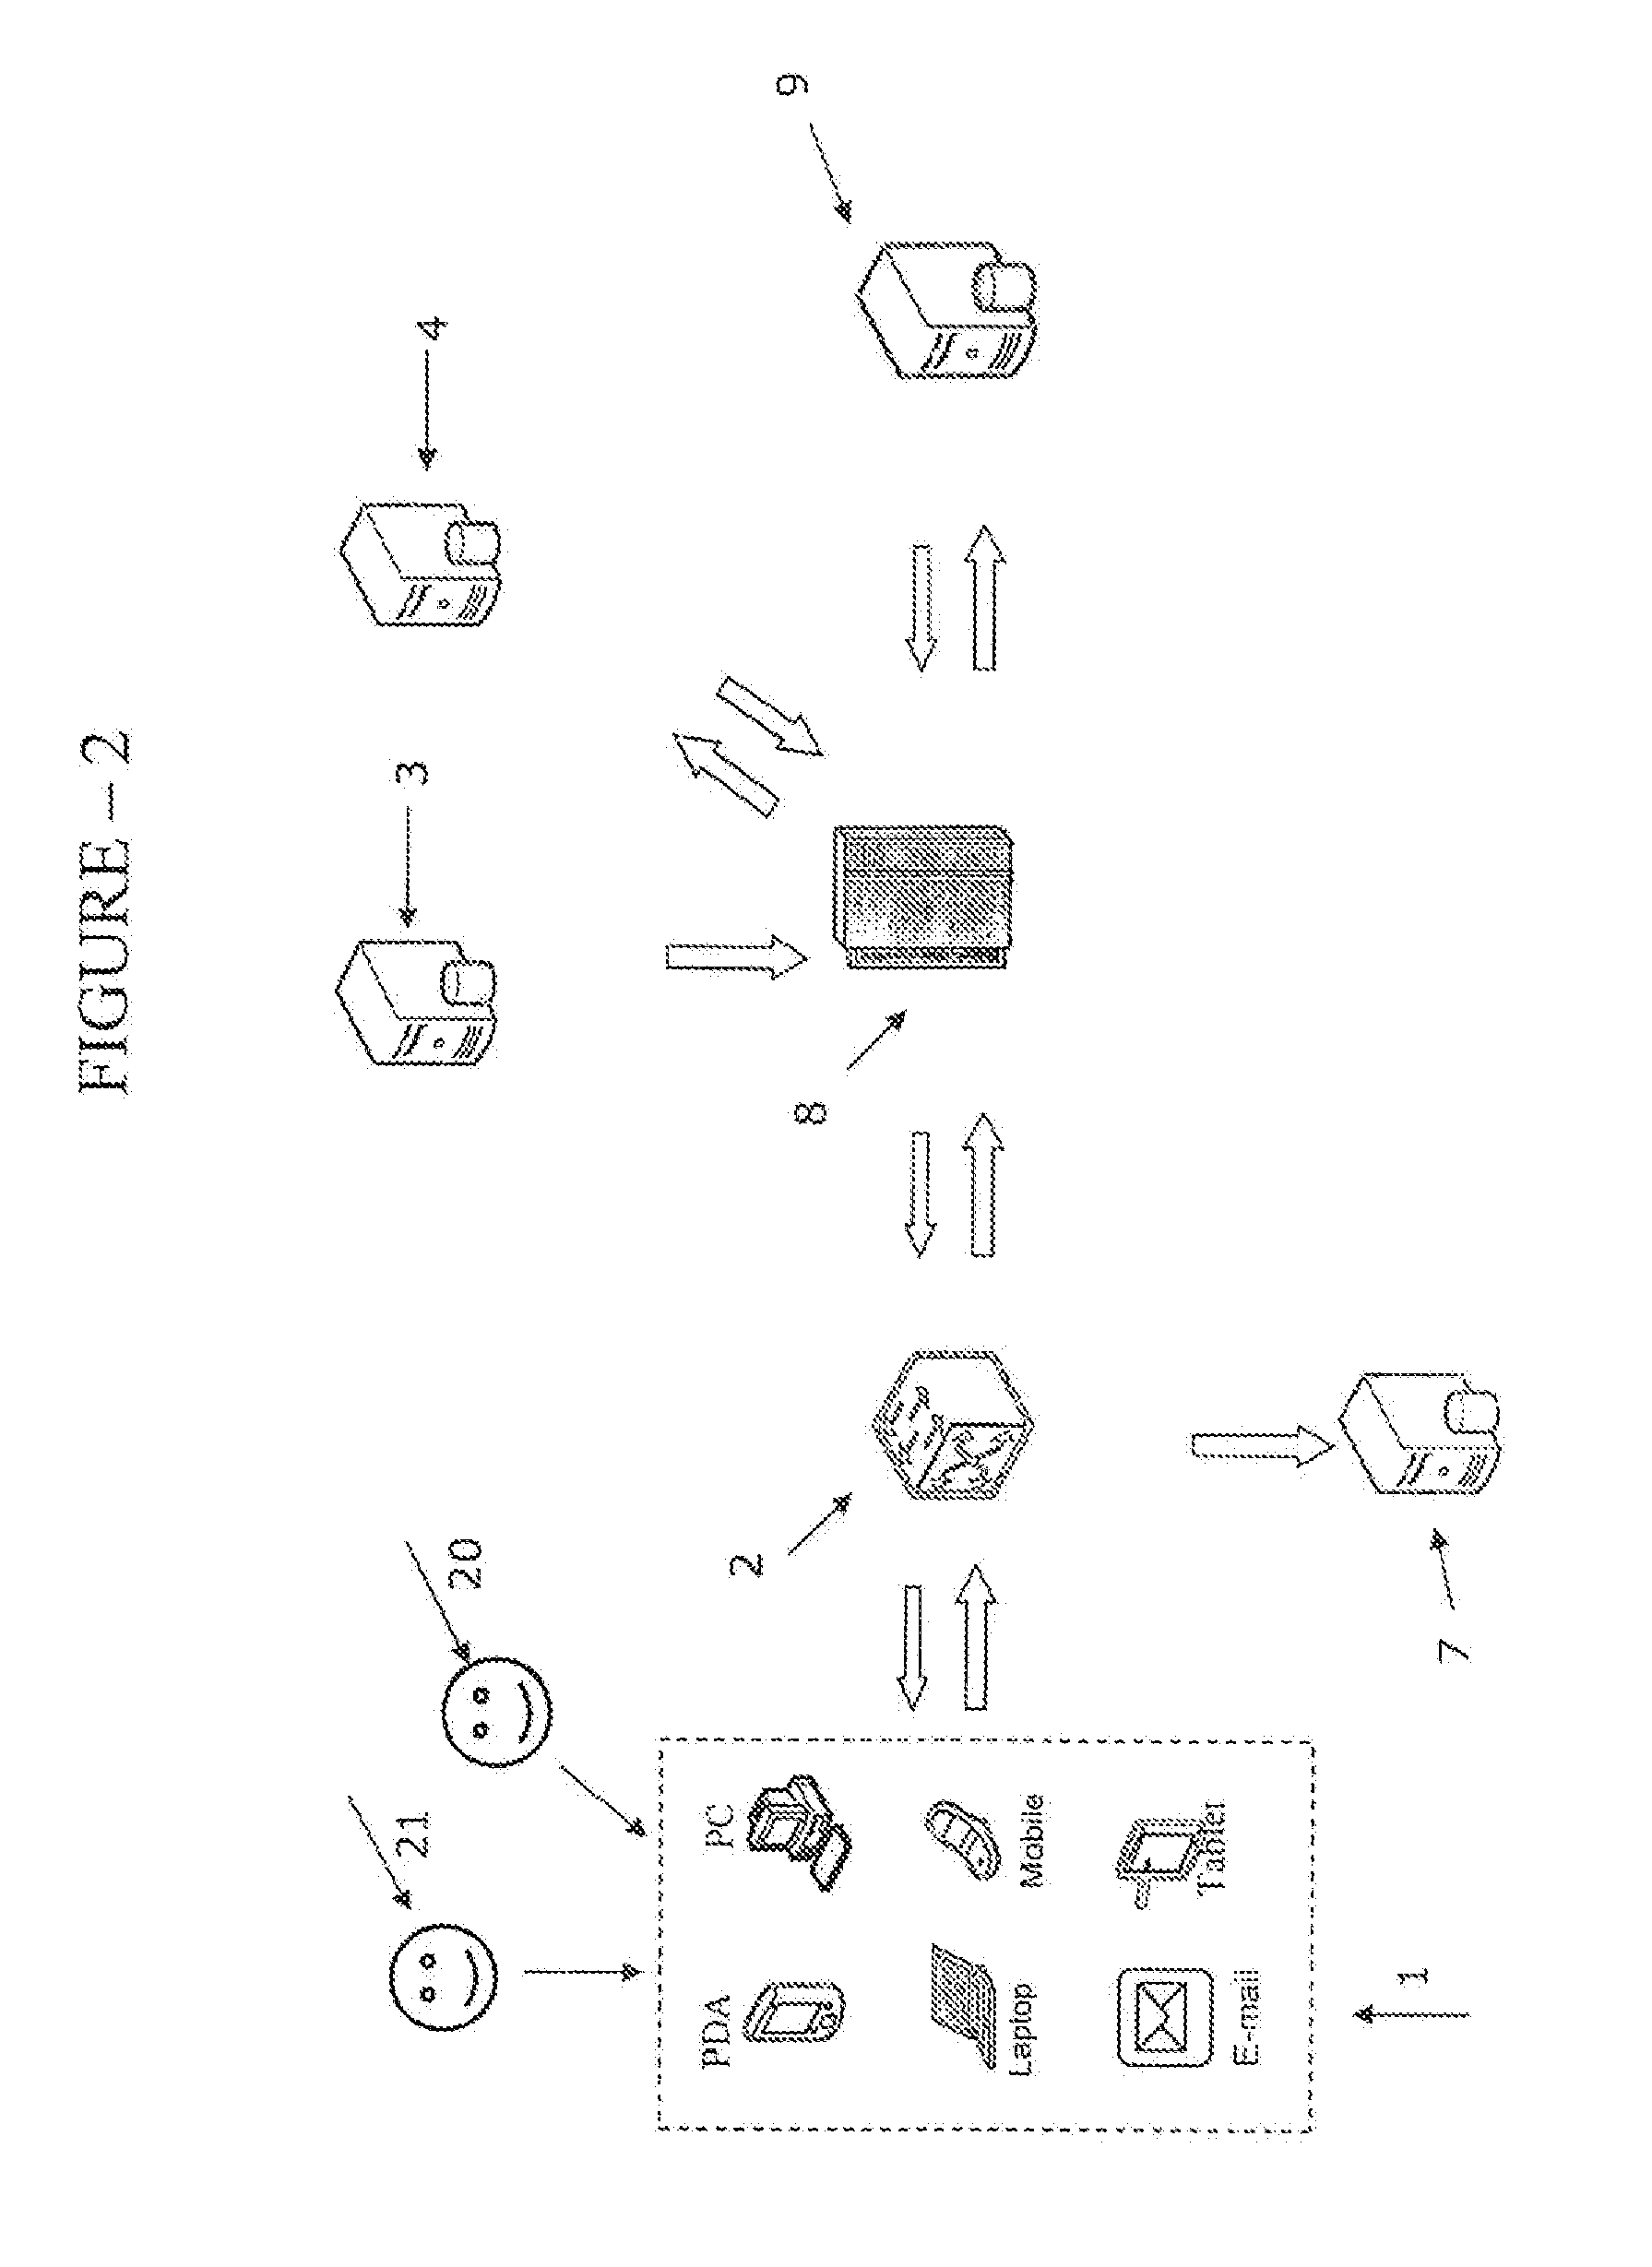 Methods and systems for transportation of objects and people through collaboration networks of people connected via trust relationships